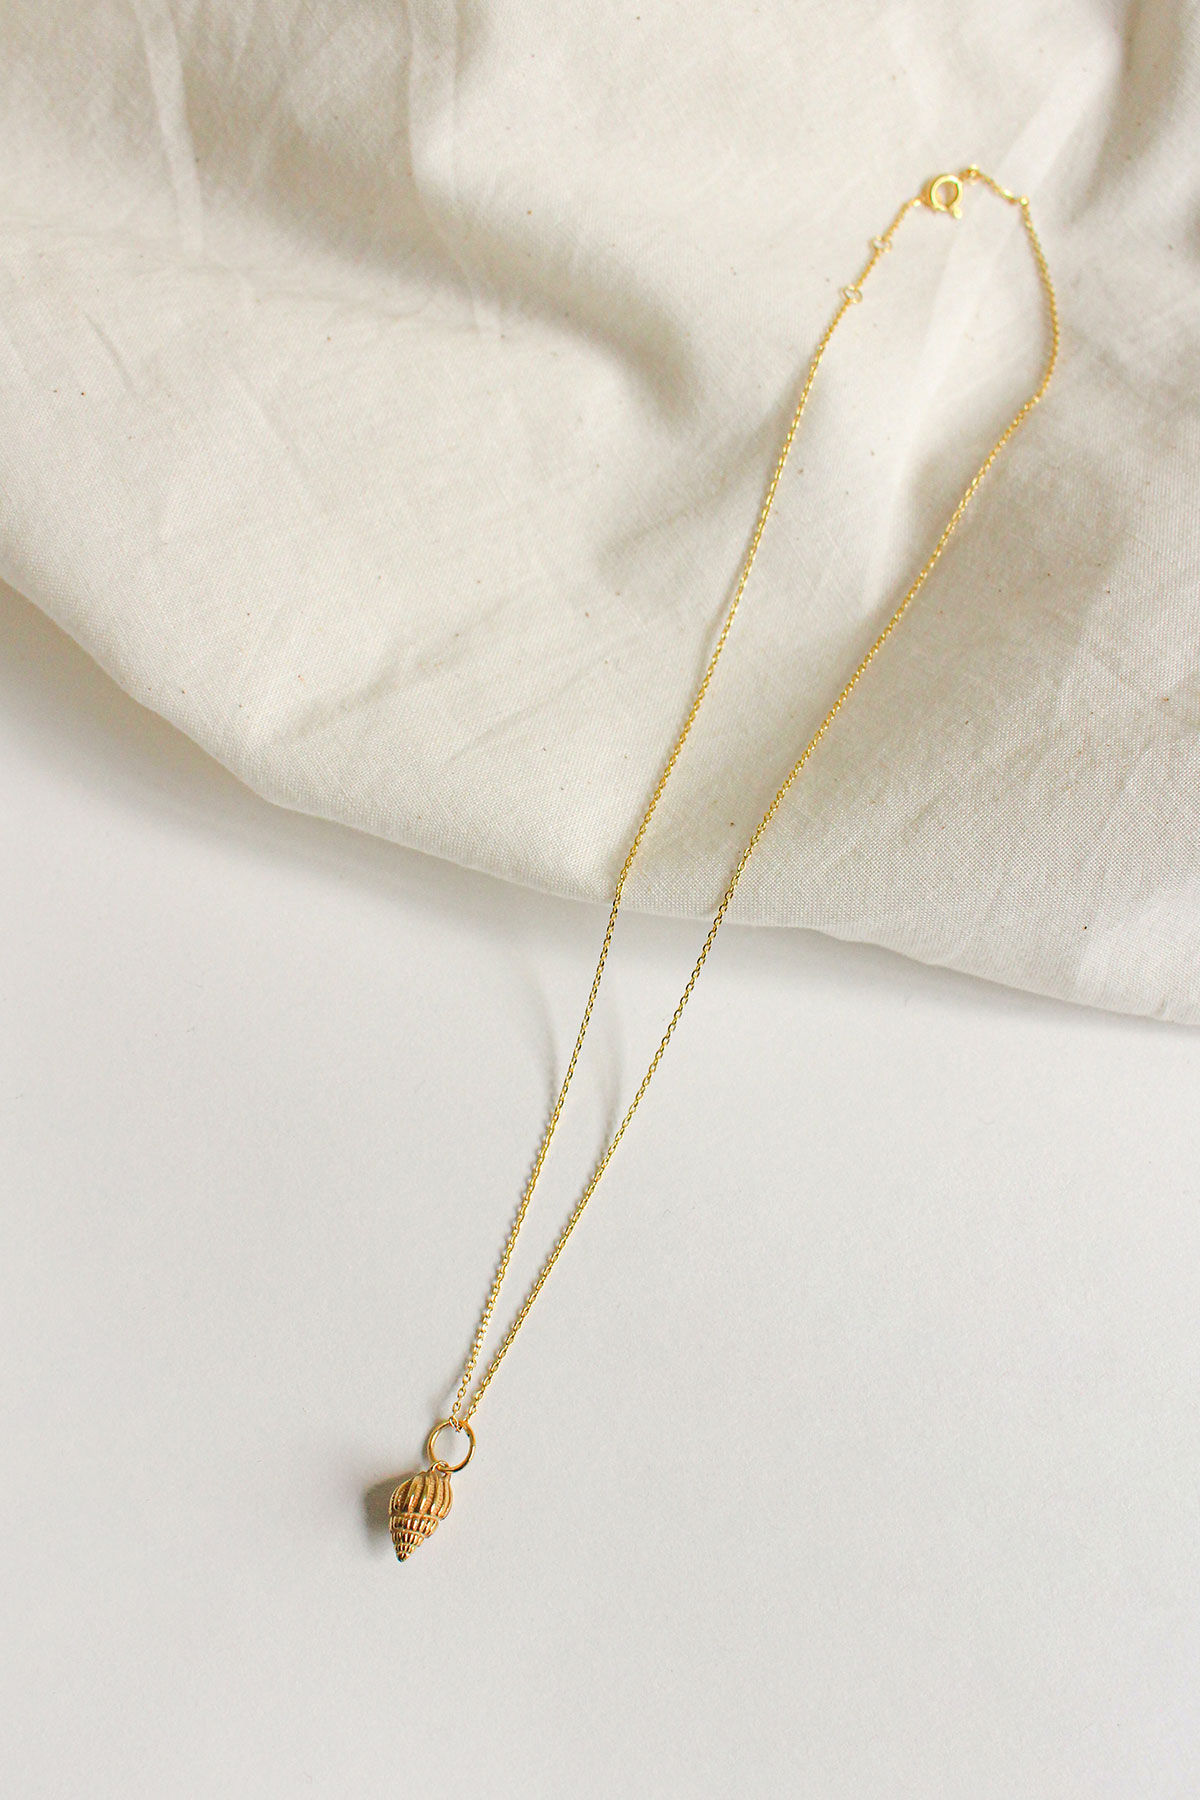 GOLD CONCH NECKLACE (925 SILVER)